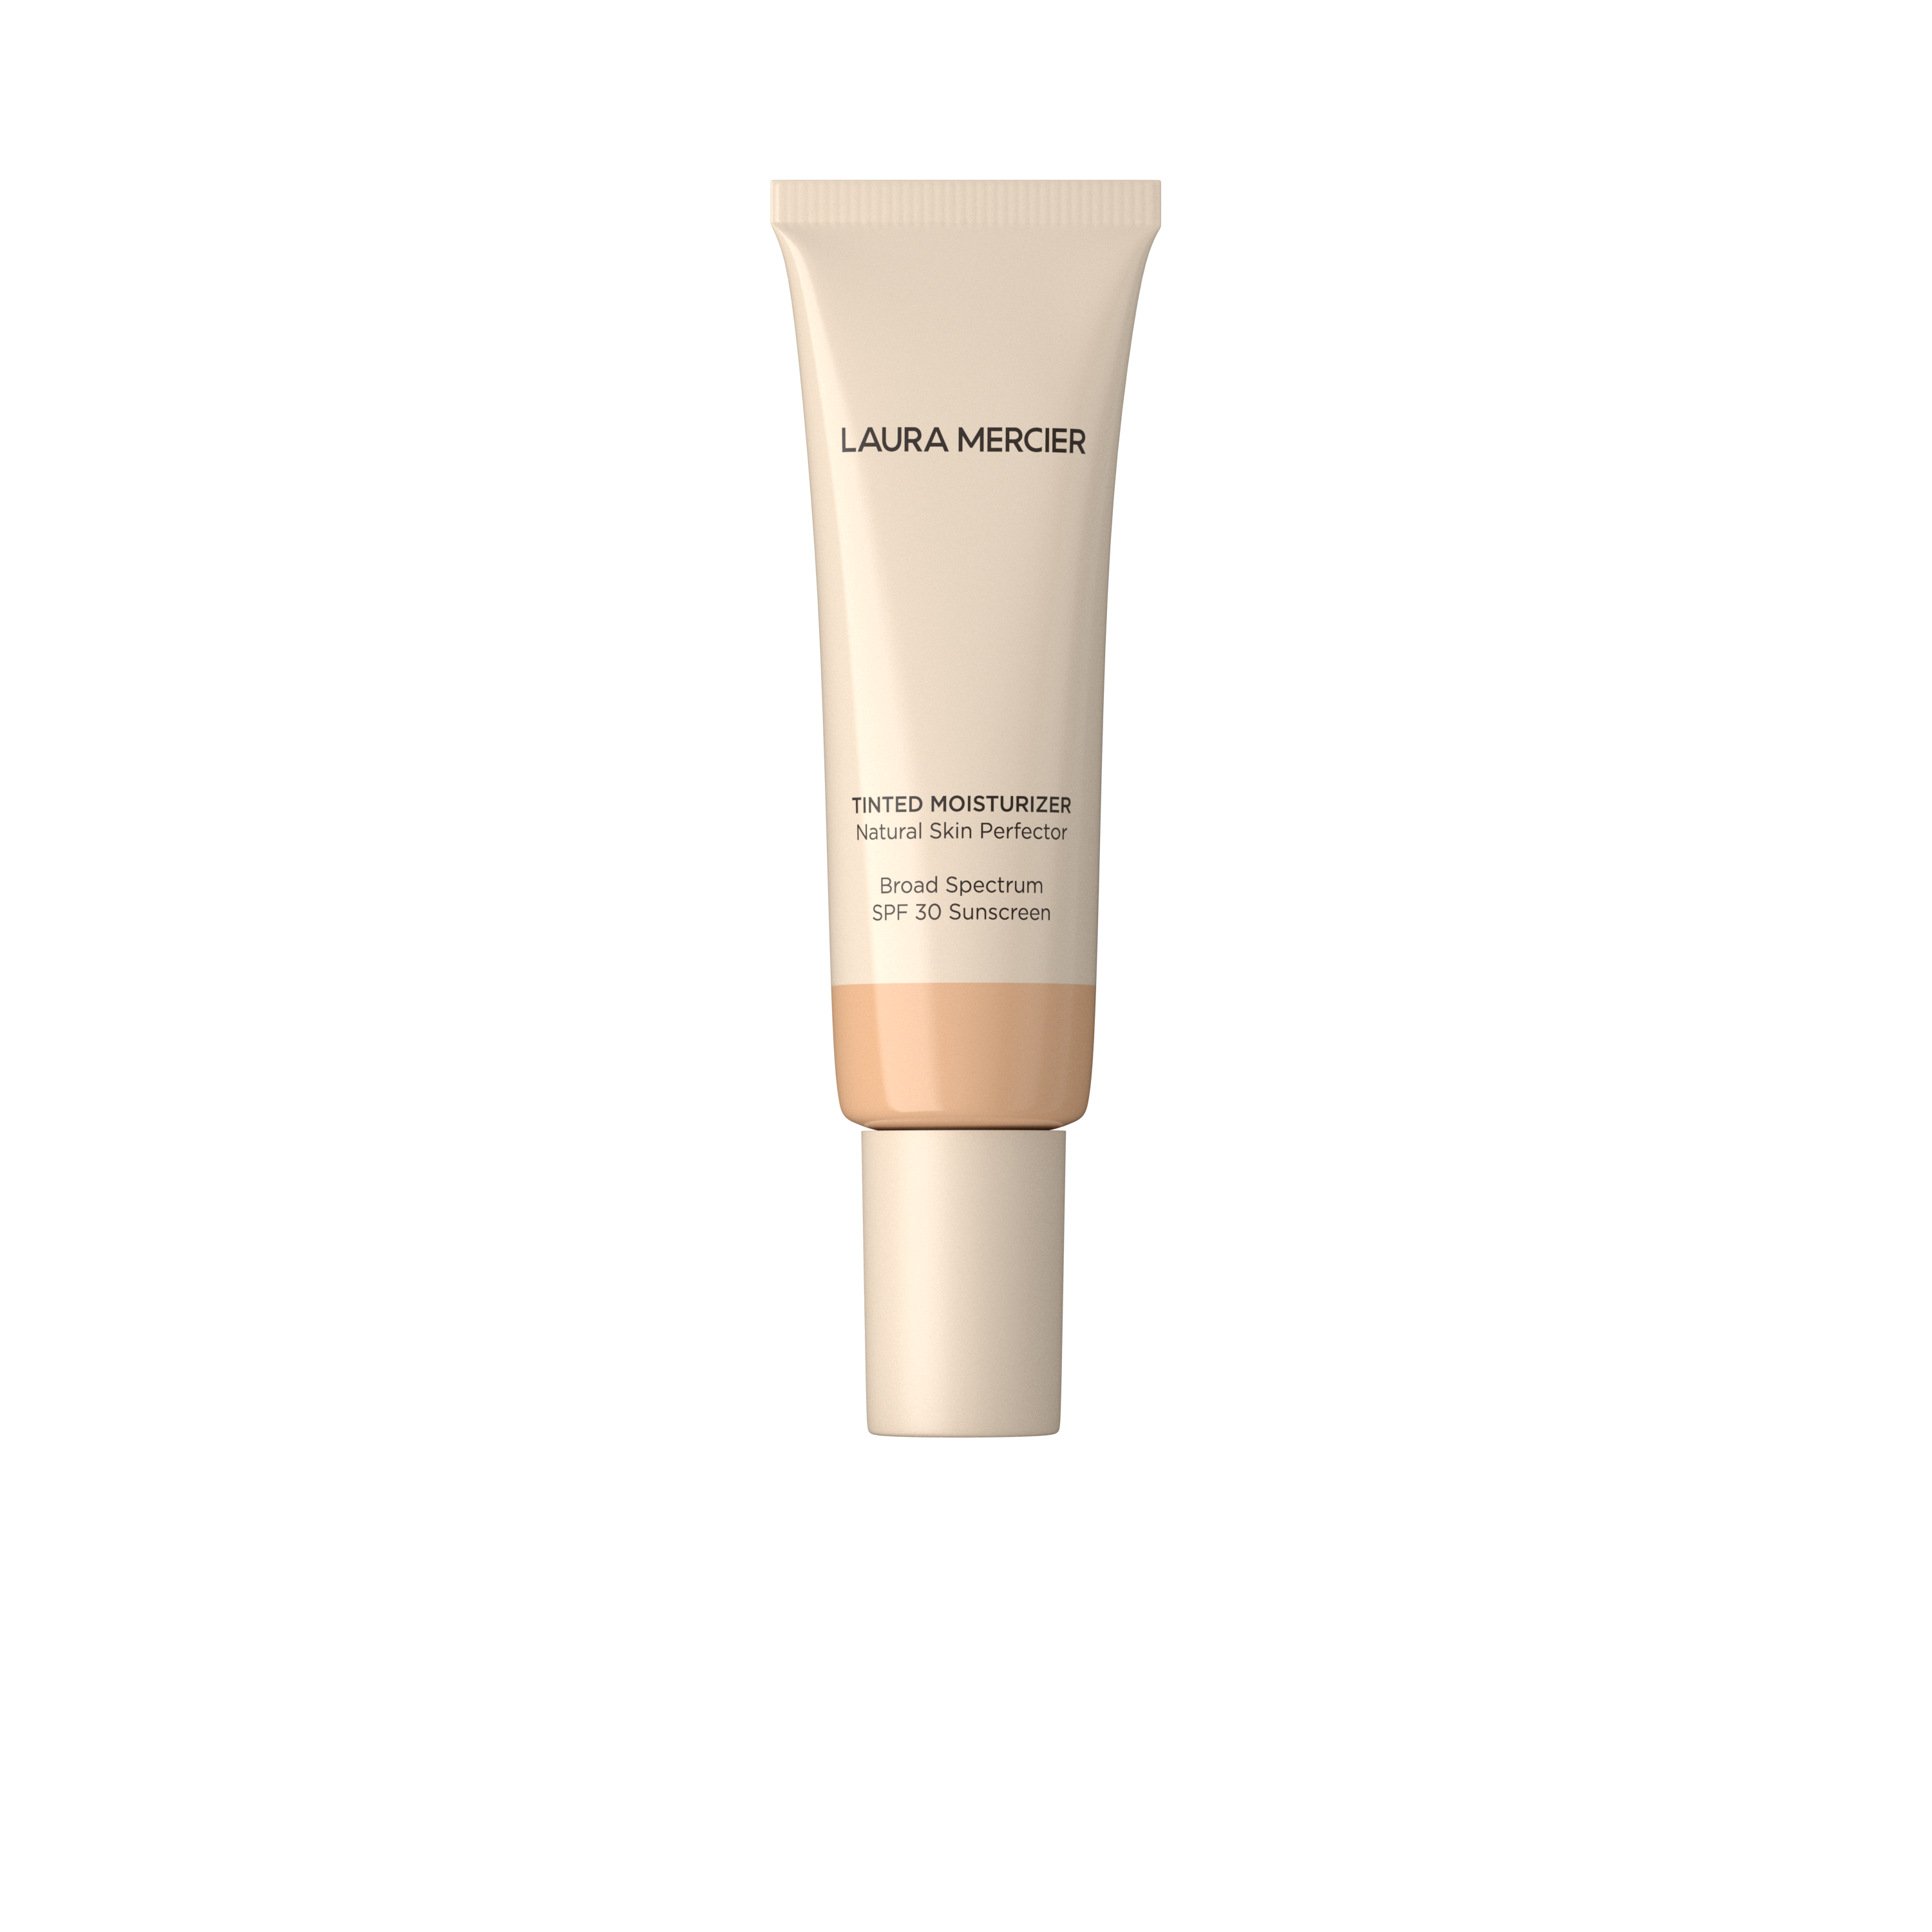 Tinted Moisturizer Natural Skin Perfector SPF 30 View 1